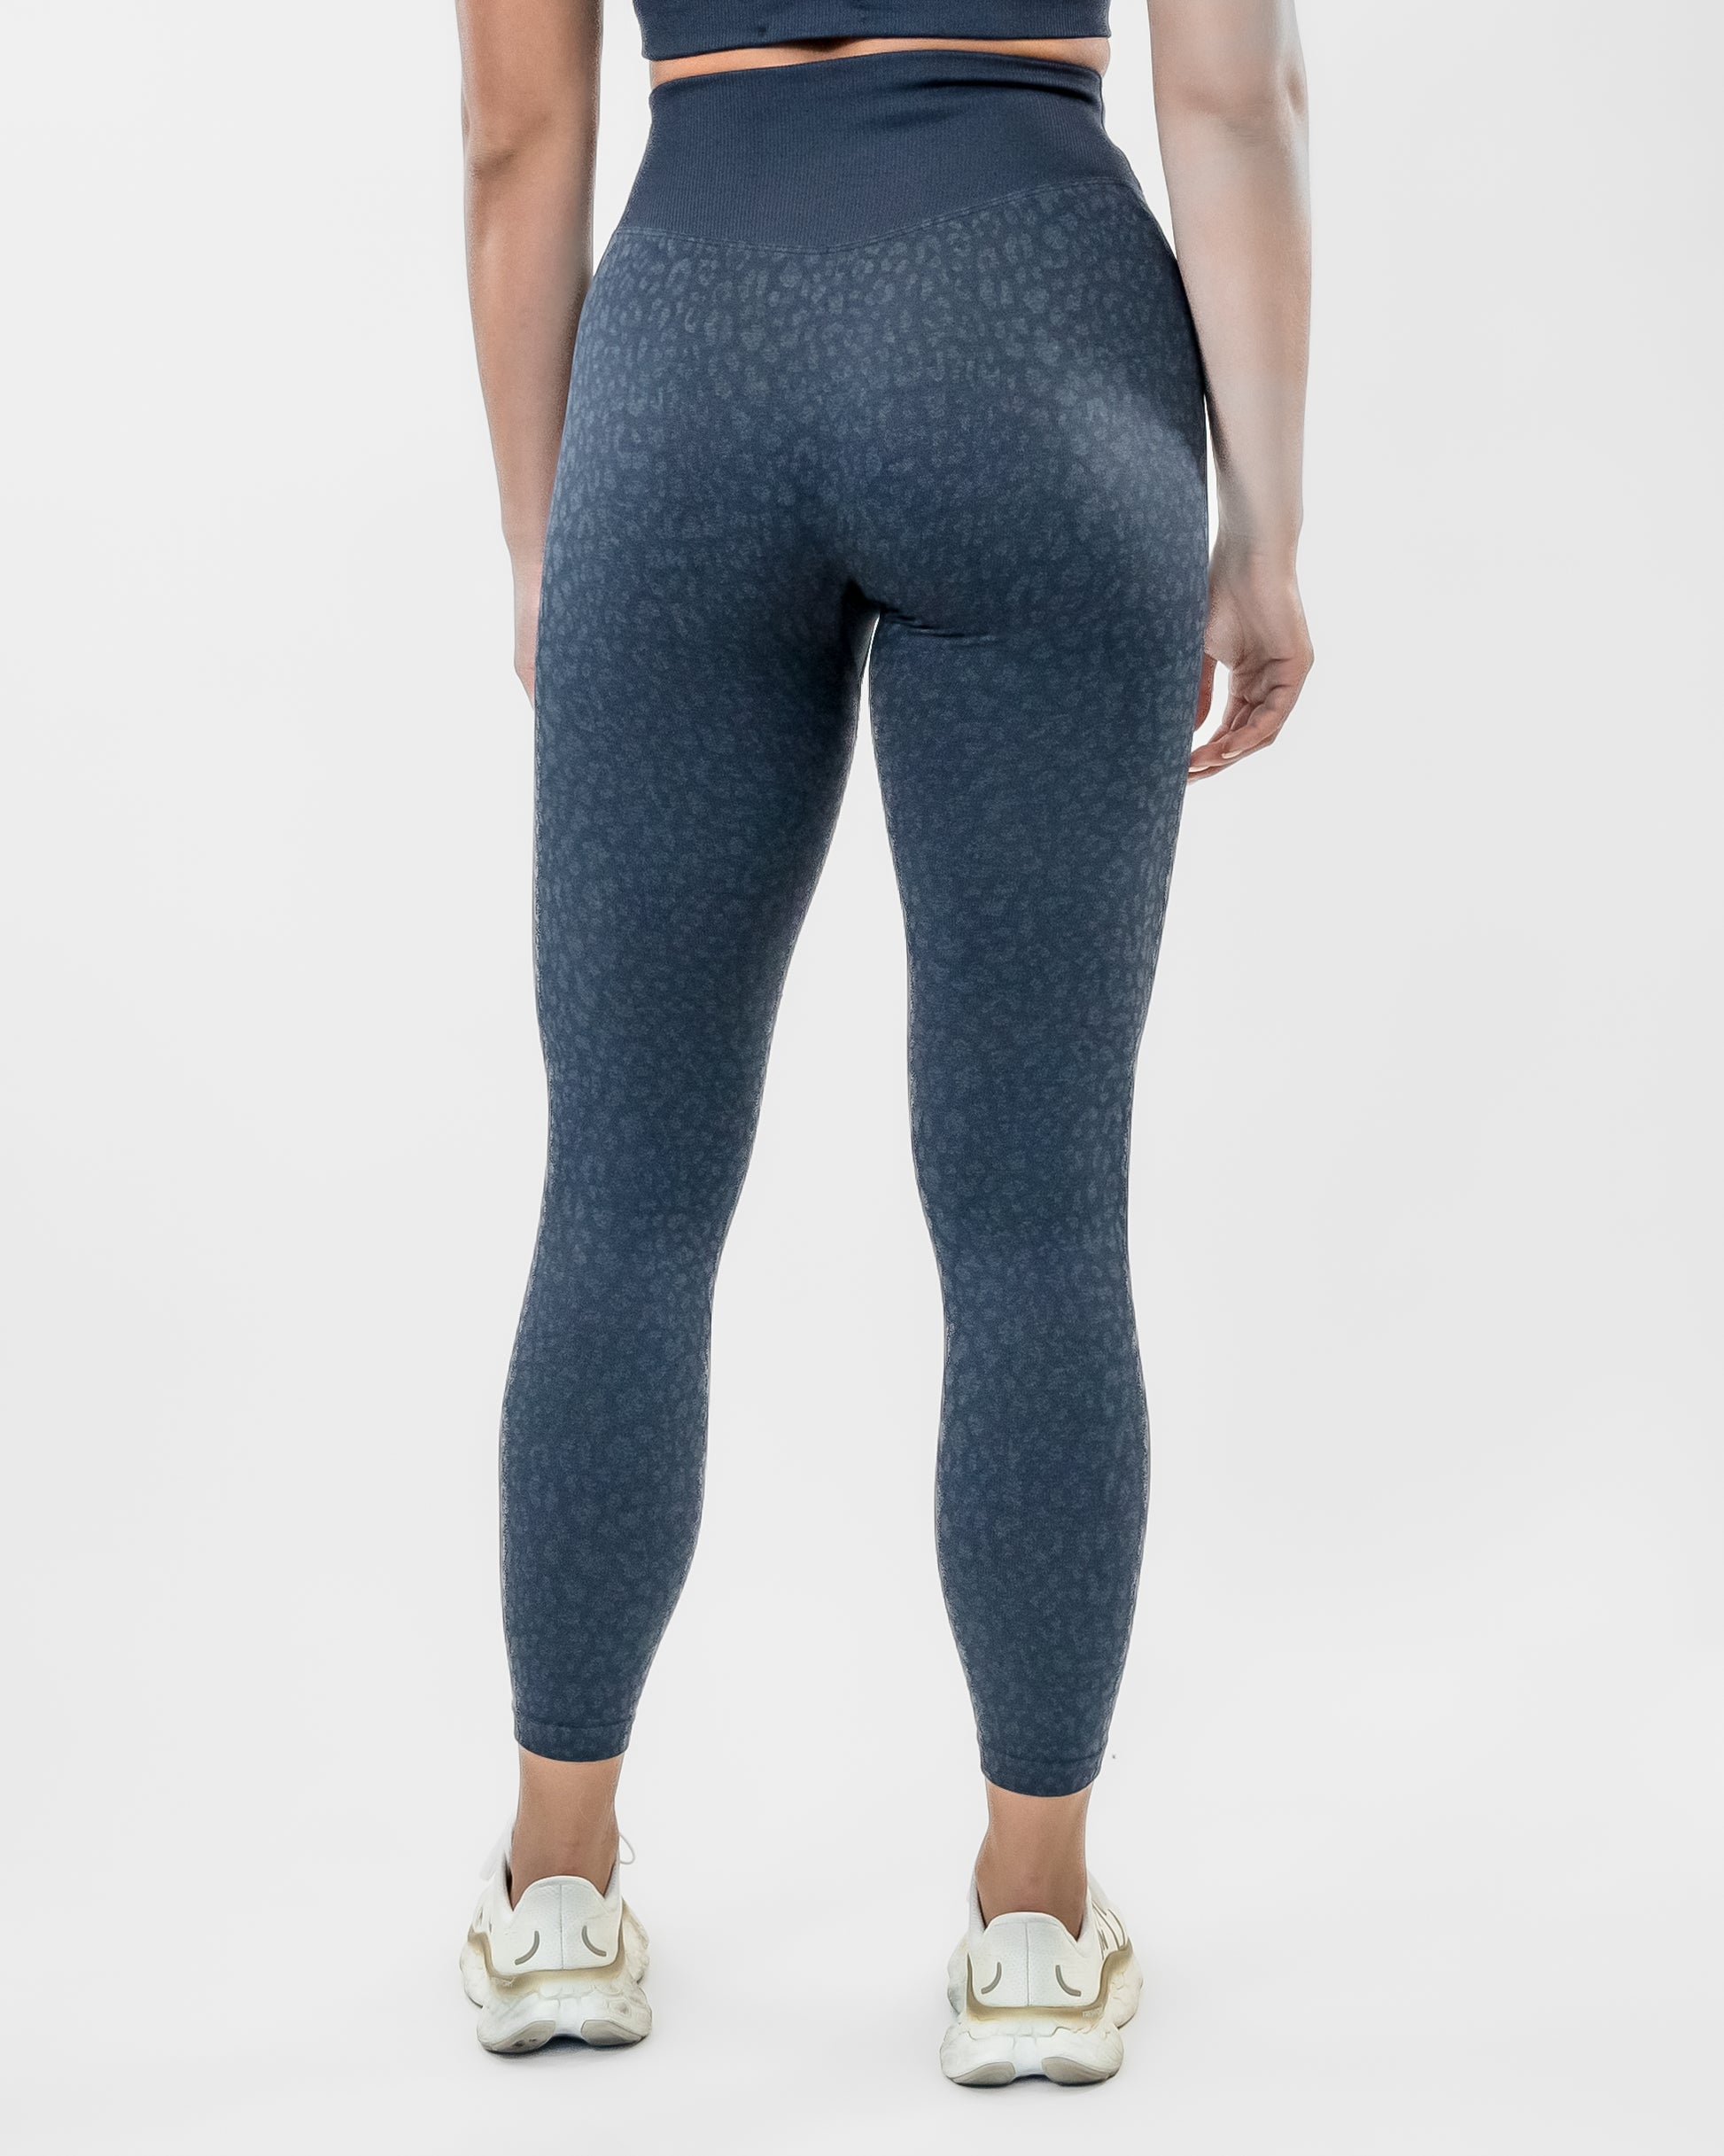 7.0 Leggings In Technical Fabric by EA7 at ORCHARD MILE